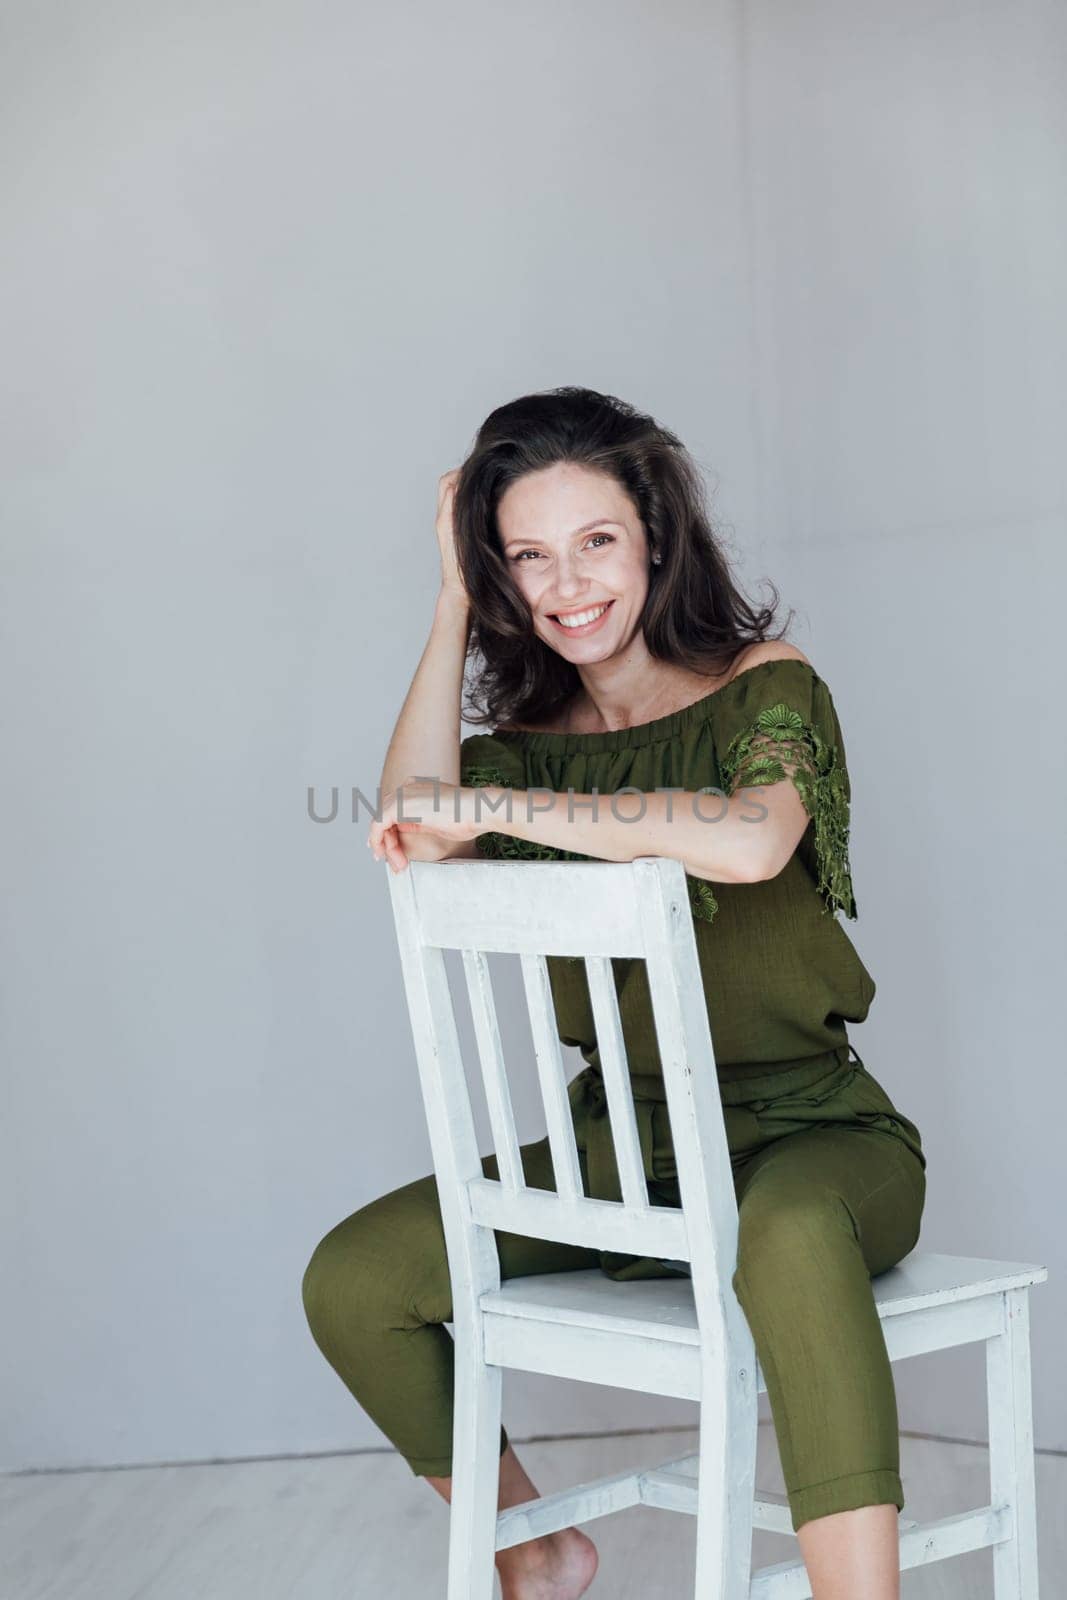 fashionable woman sits on a white chair and poses on a gray background